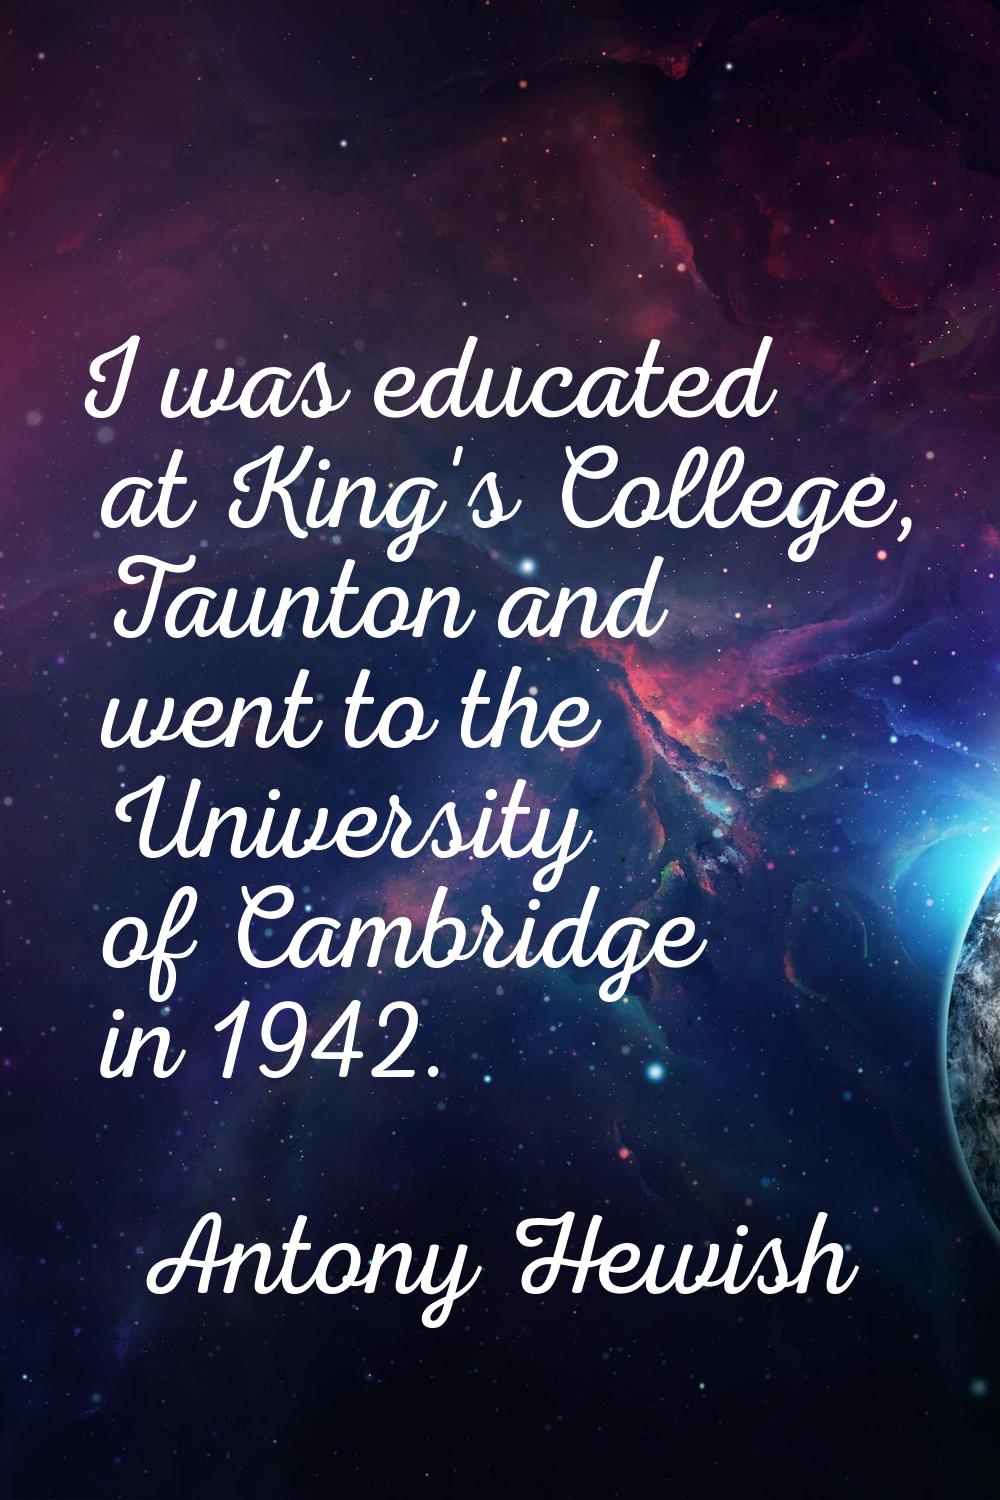 I was educated at King's College, Taunton and went to the University of Cambridge in 1942.